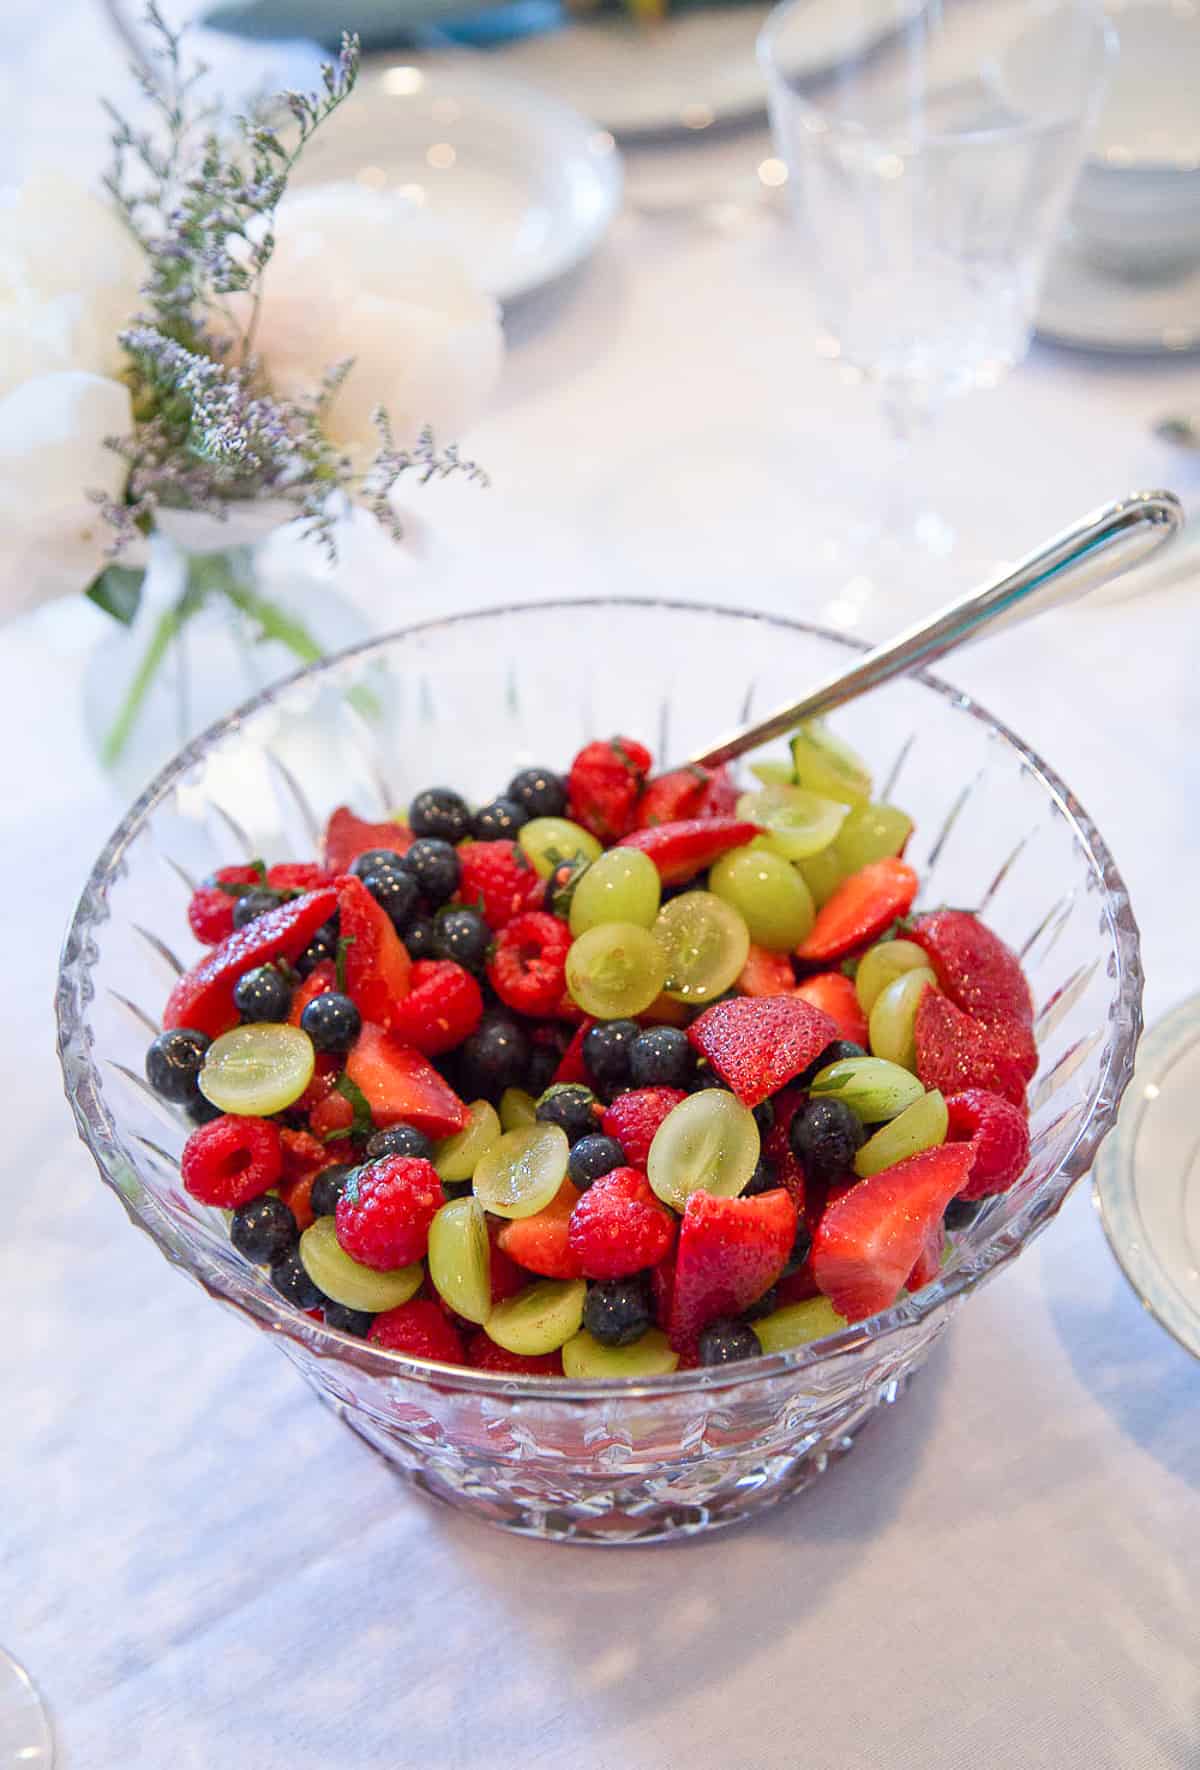 fruit salad in a glass bowl on a white tablecloth.